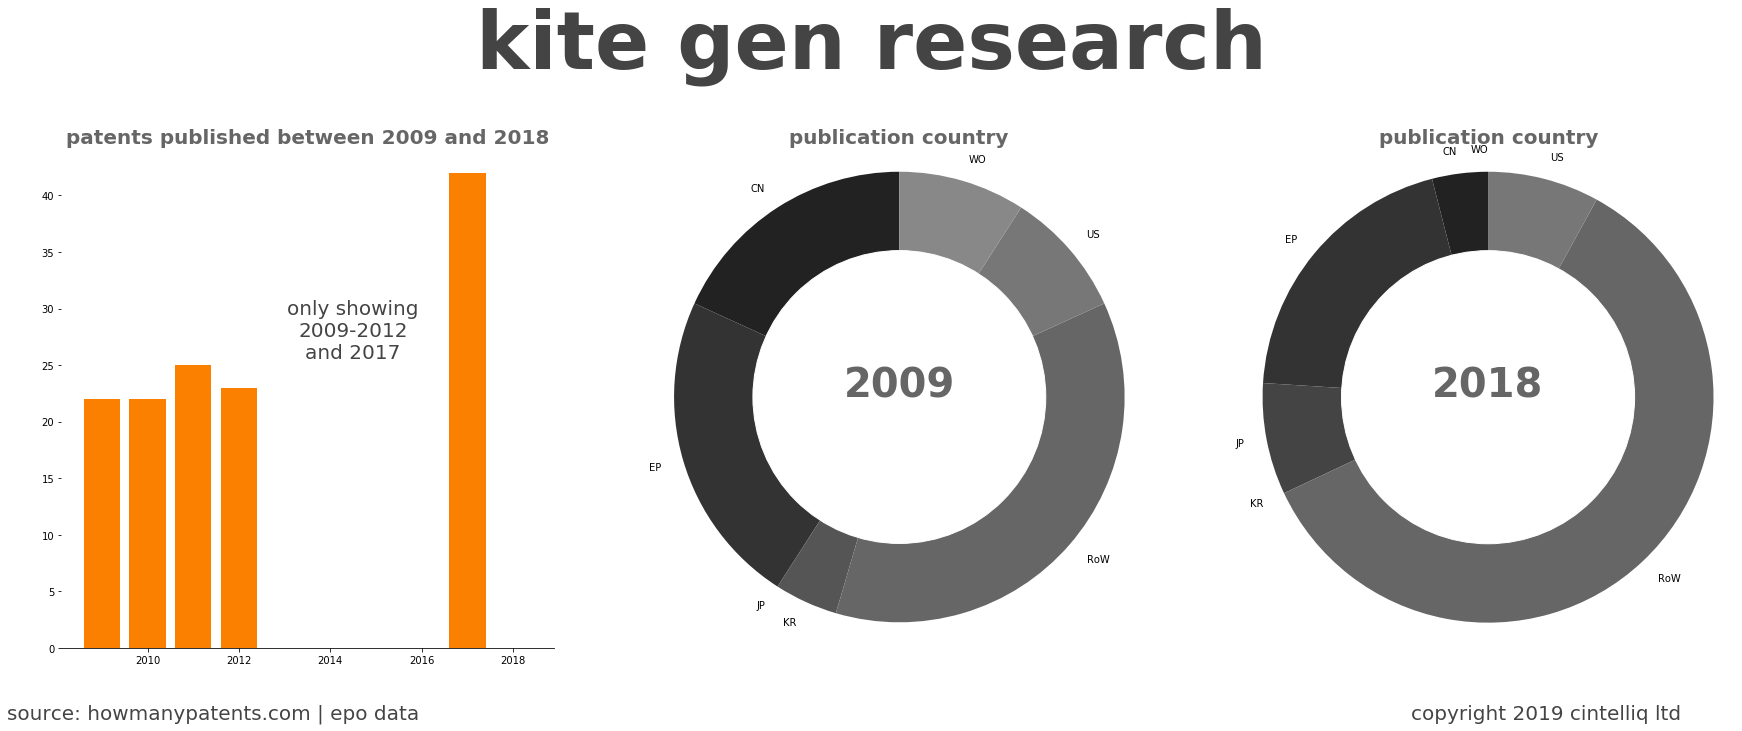 summary of patents for Kite Gen Research